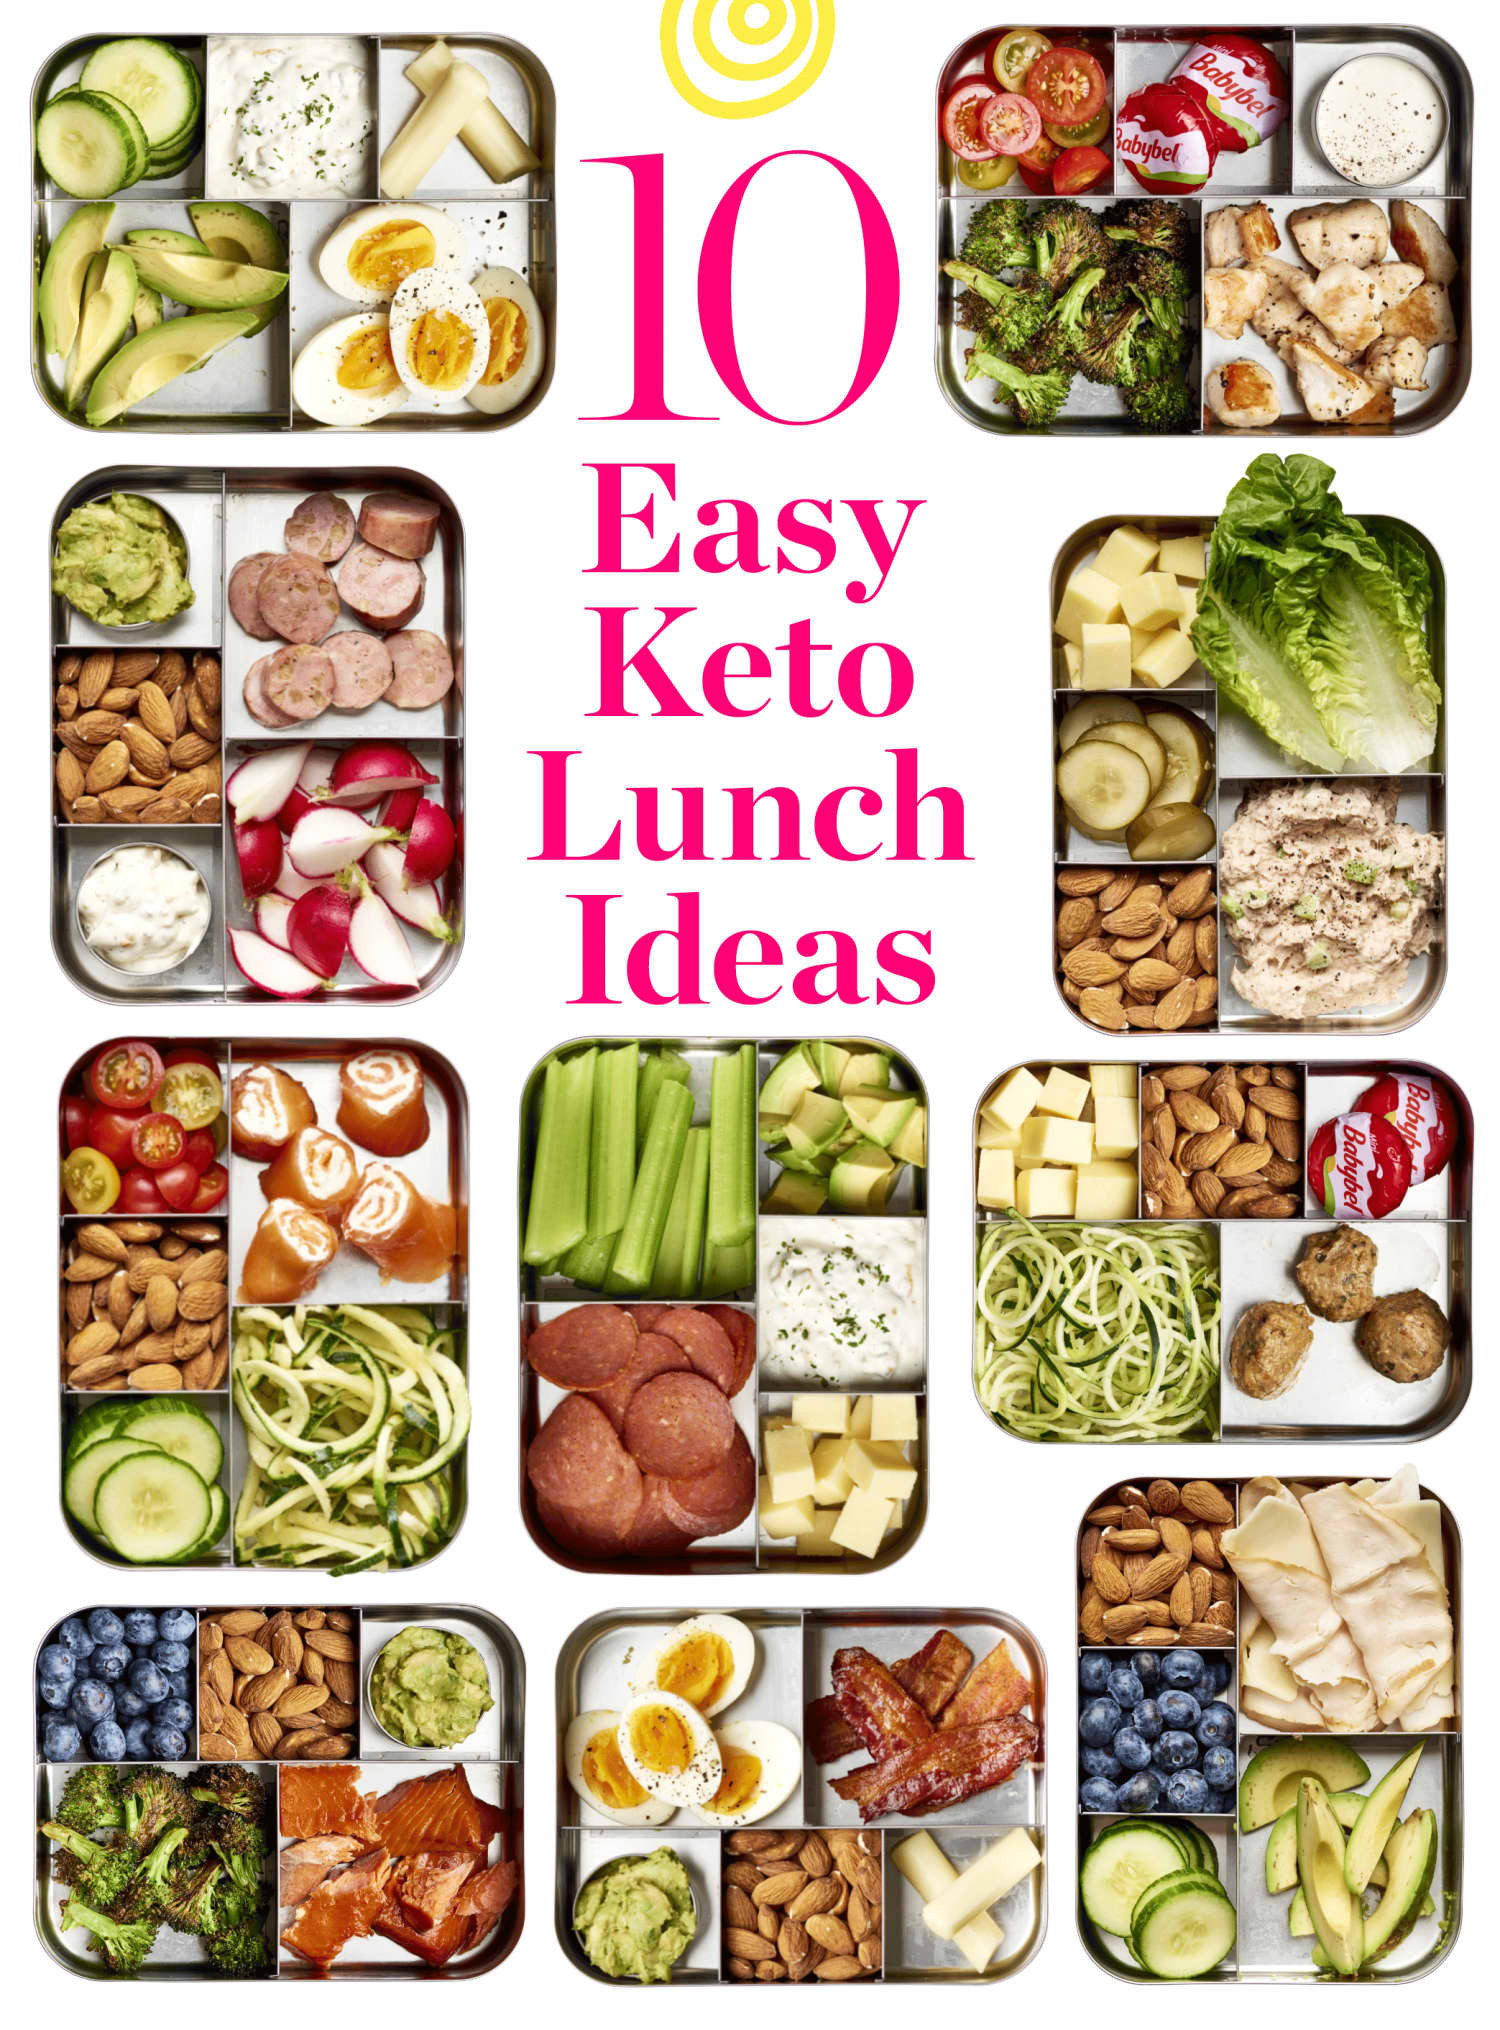 Easy Keto Lunch Ideas
 10 Easy Keto Lunch Ideas with Net Carb Counts